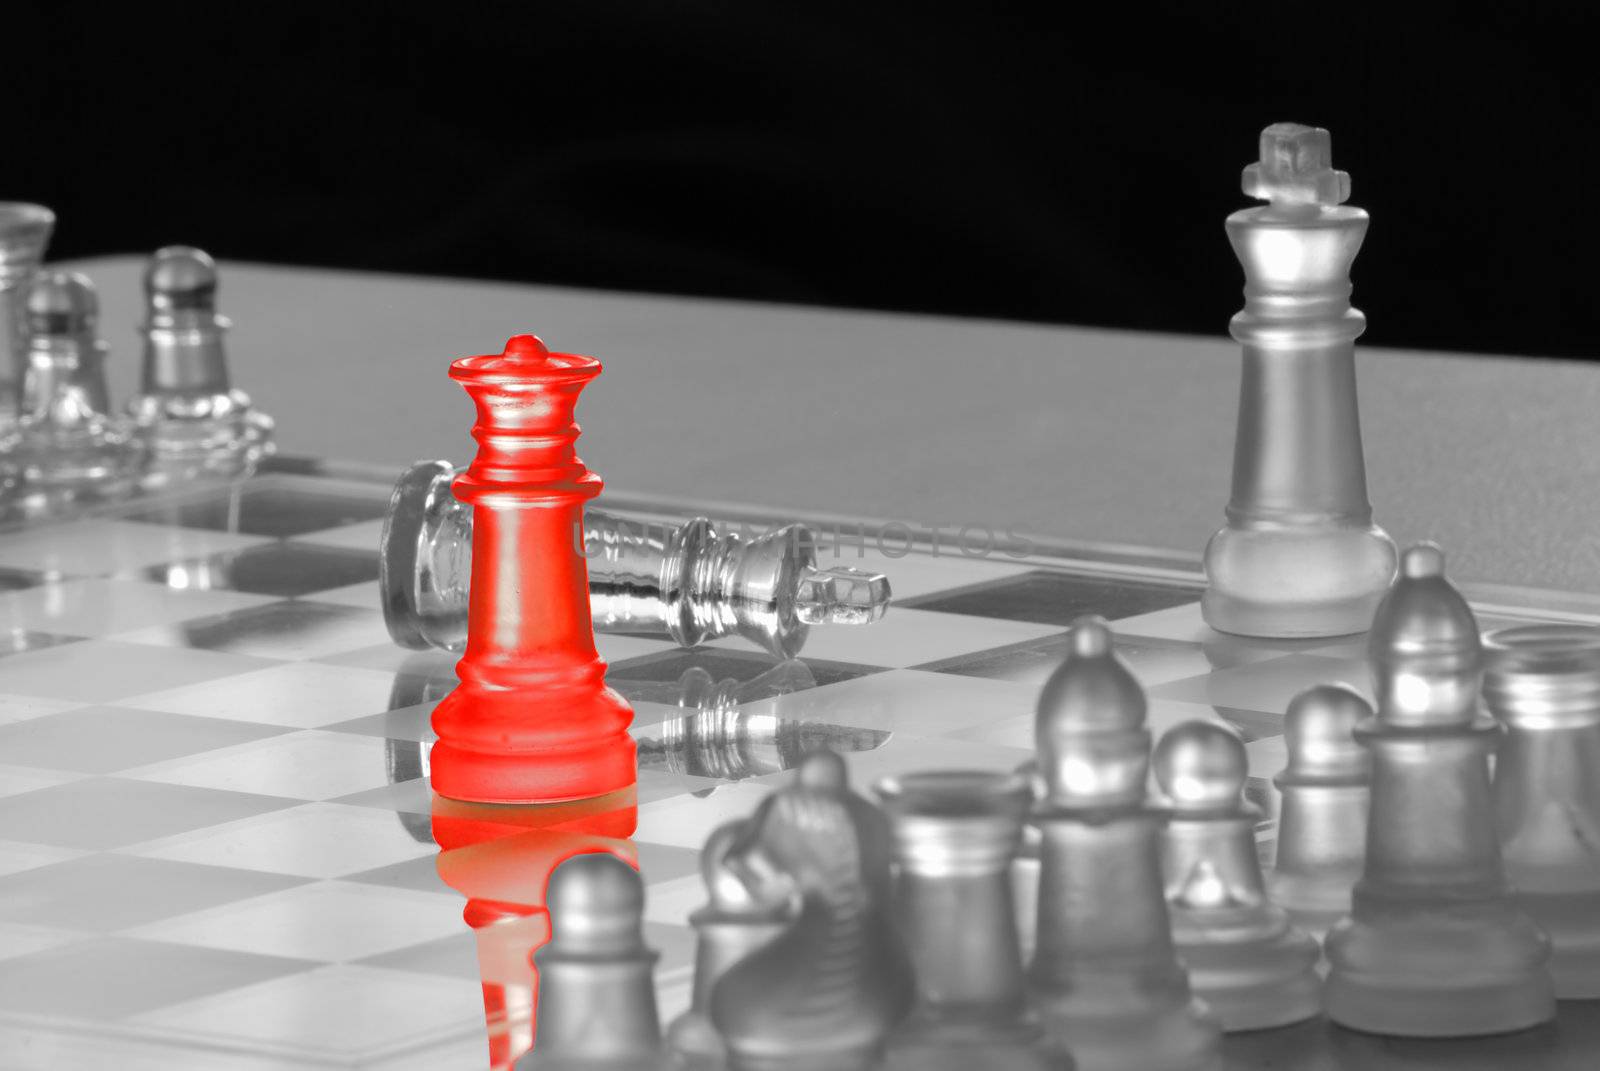 Horizontal image of a glass chess set, rendered in black and white with the conquering queen colored red.